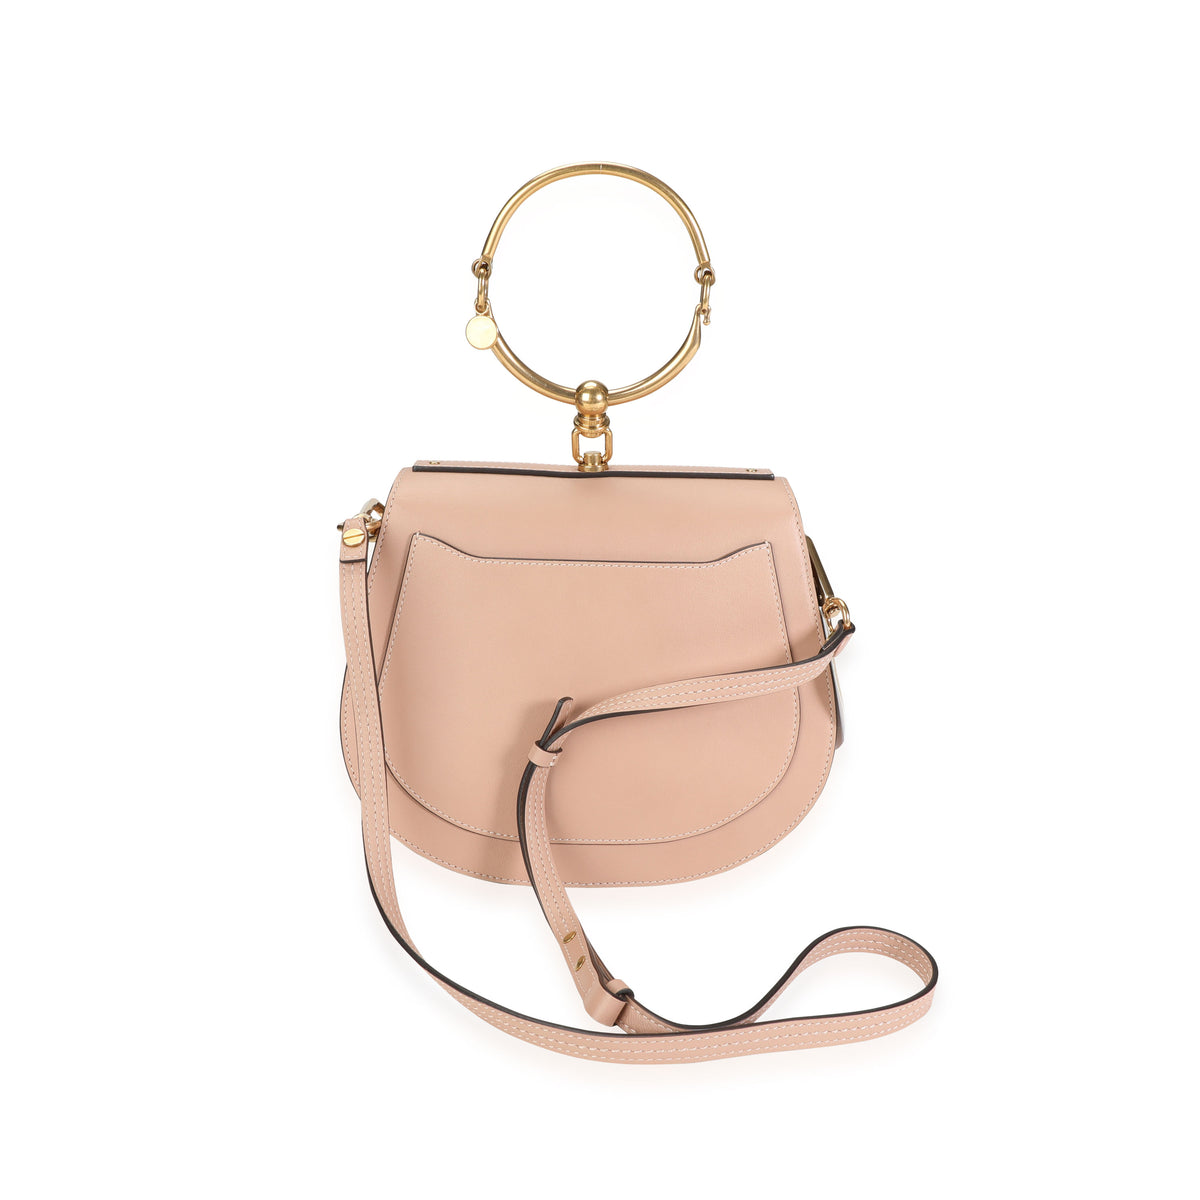 Luxe.It.Fwd - Beautiful in biscotti beige, this Chloe Nile